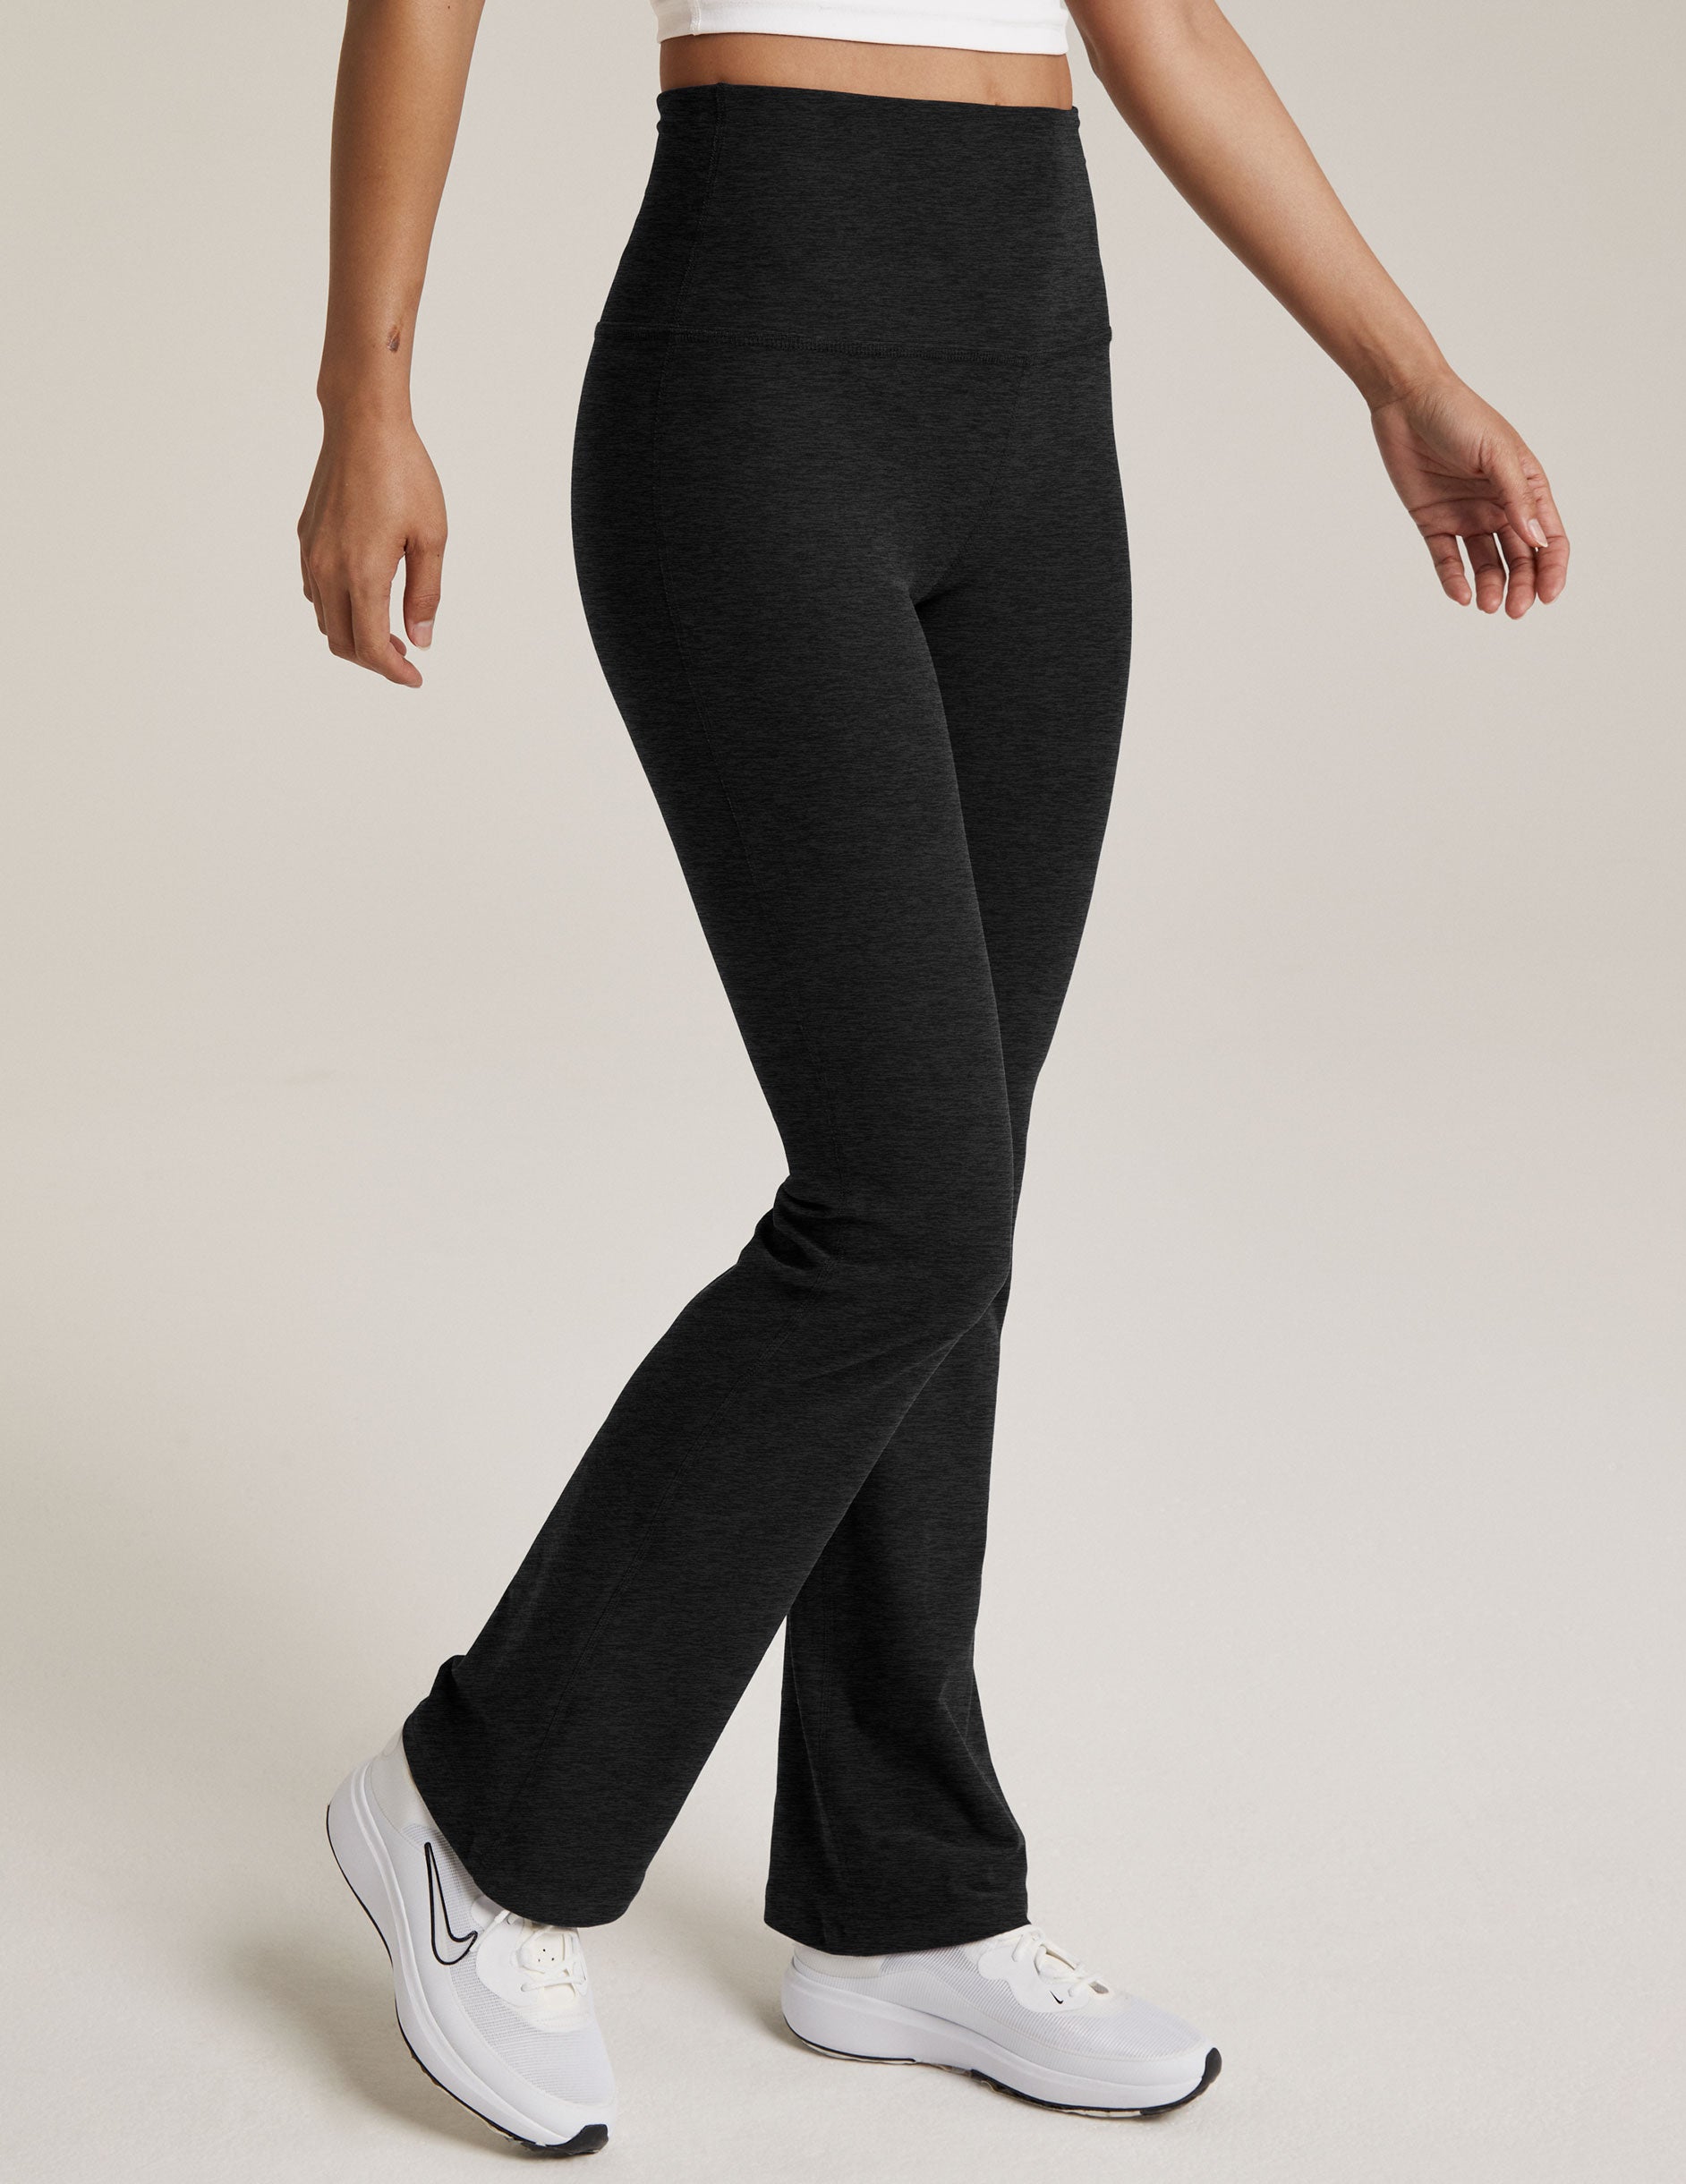 2022 New Design Boot Cut High Waisted Yoga Pants with Pocket